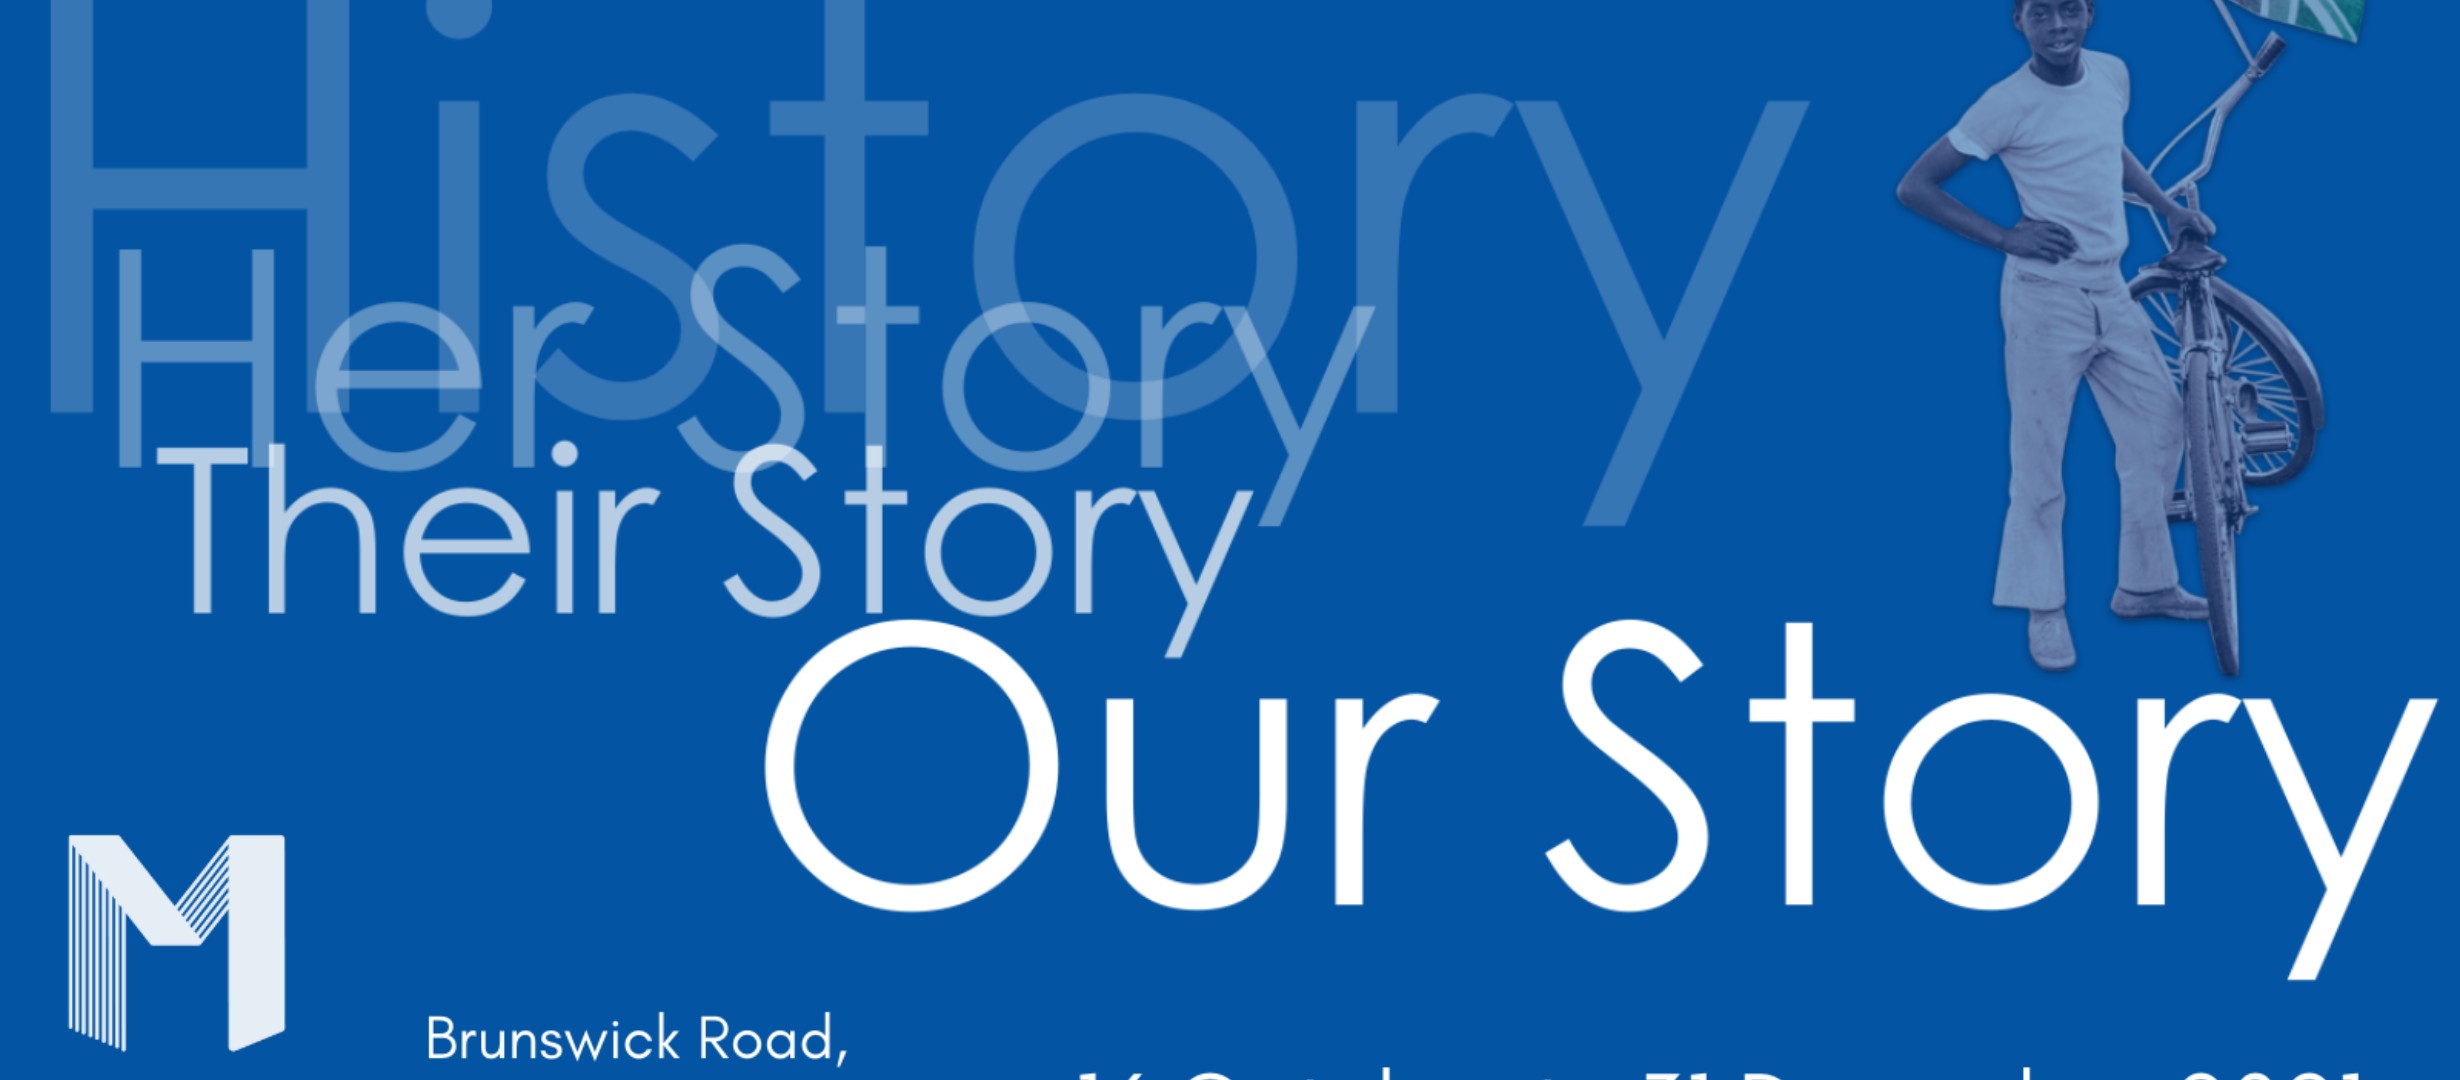 History, Her Story, Their Story, Our Story